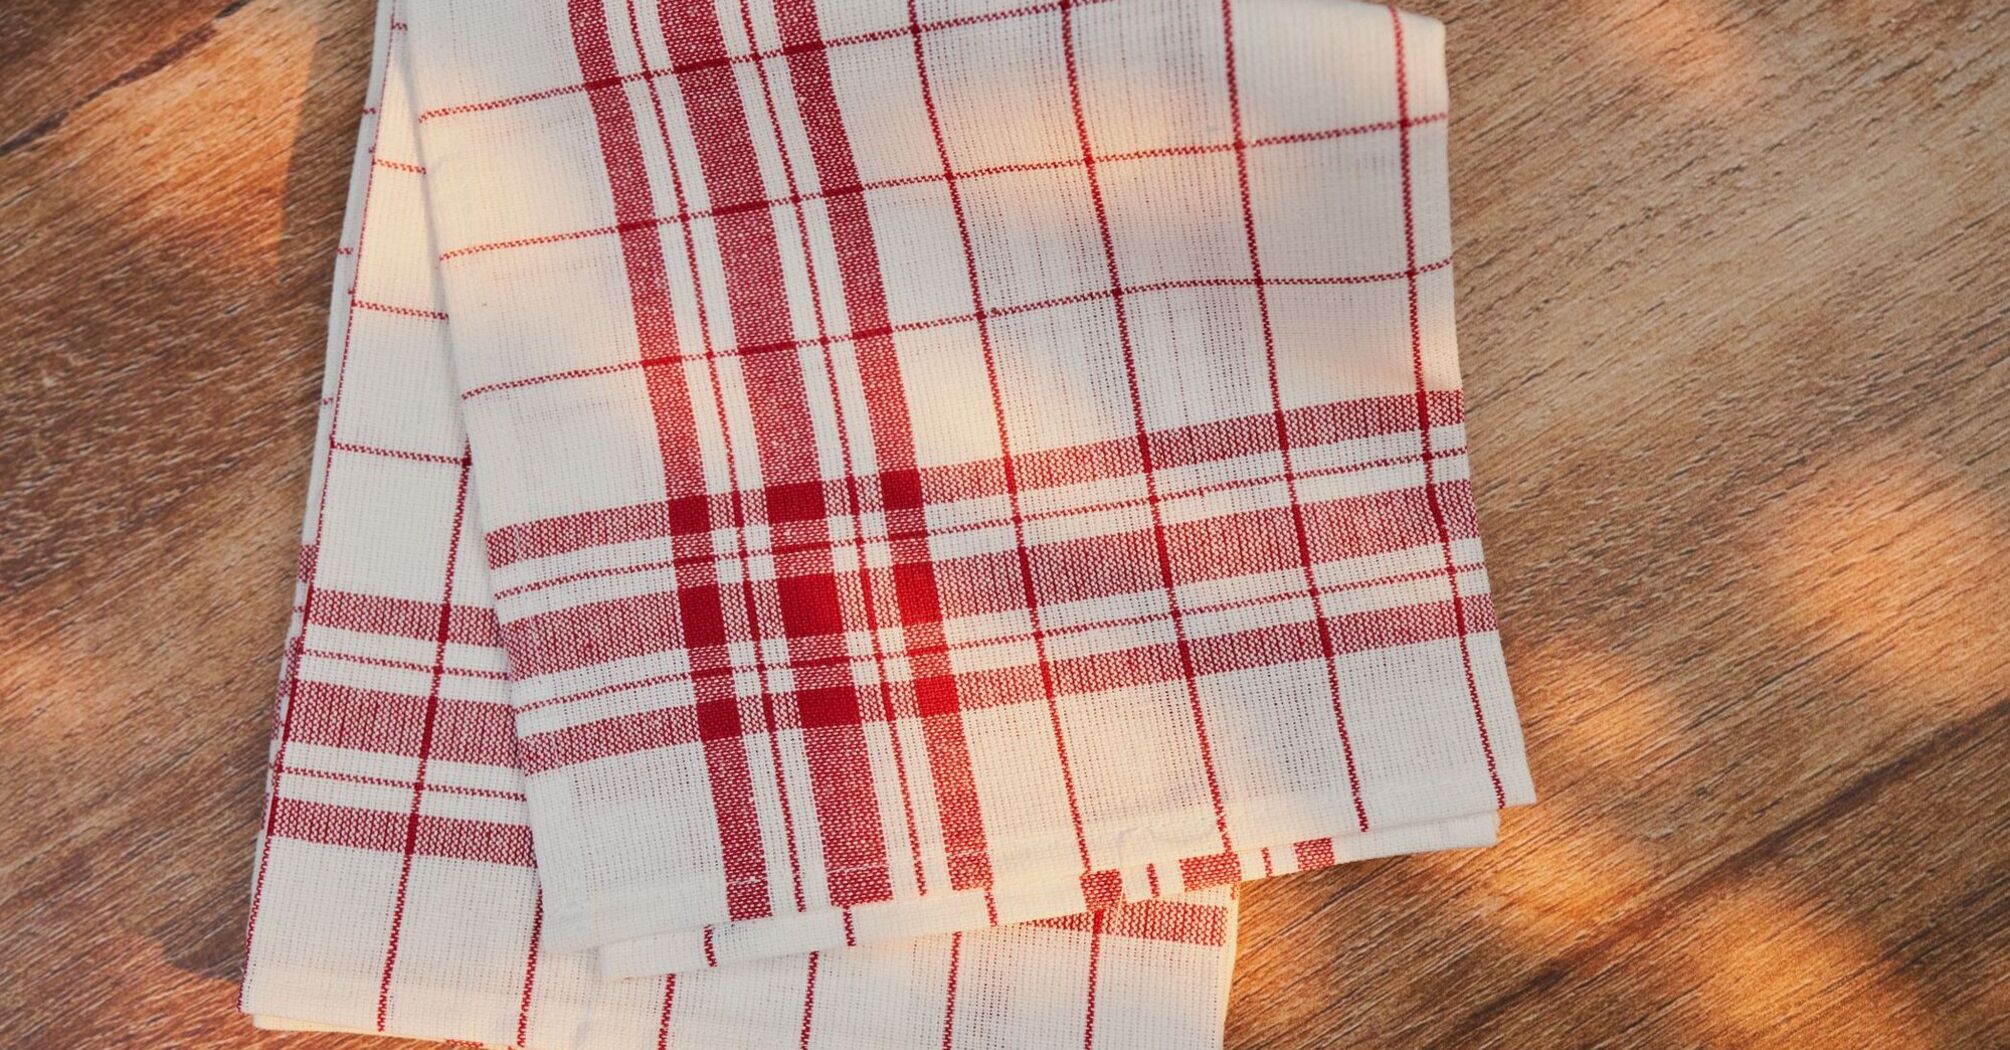 How to wash greasy kitchen towels